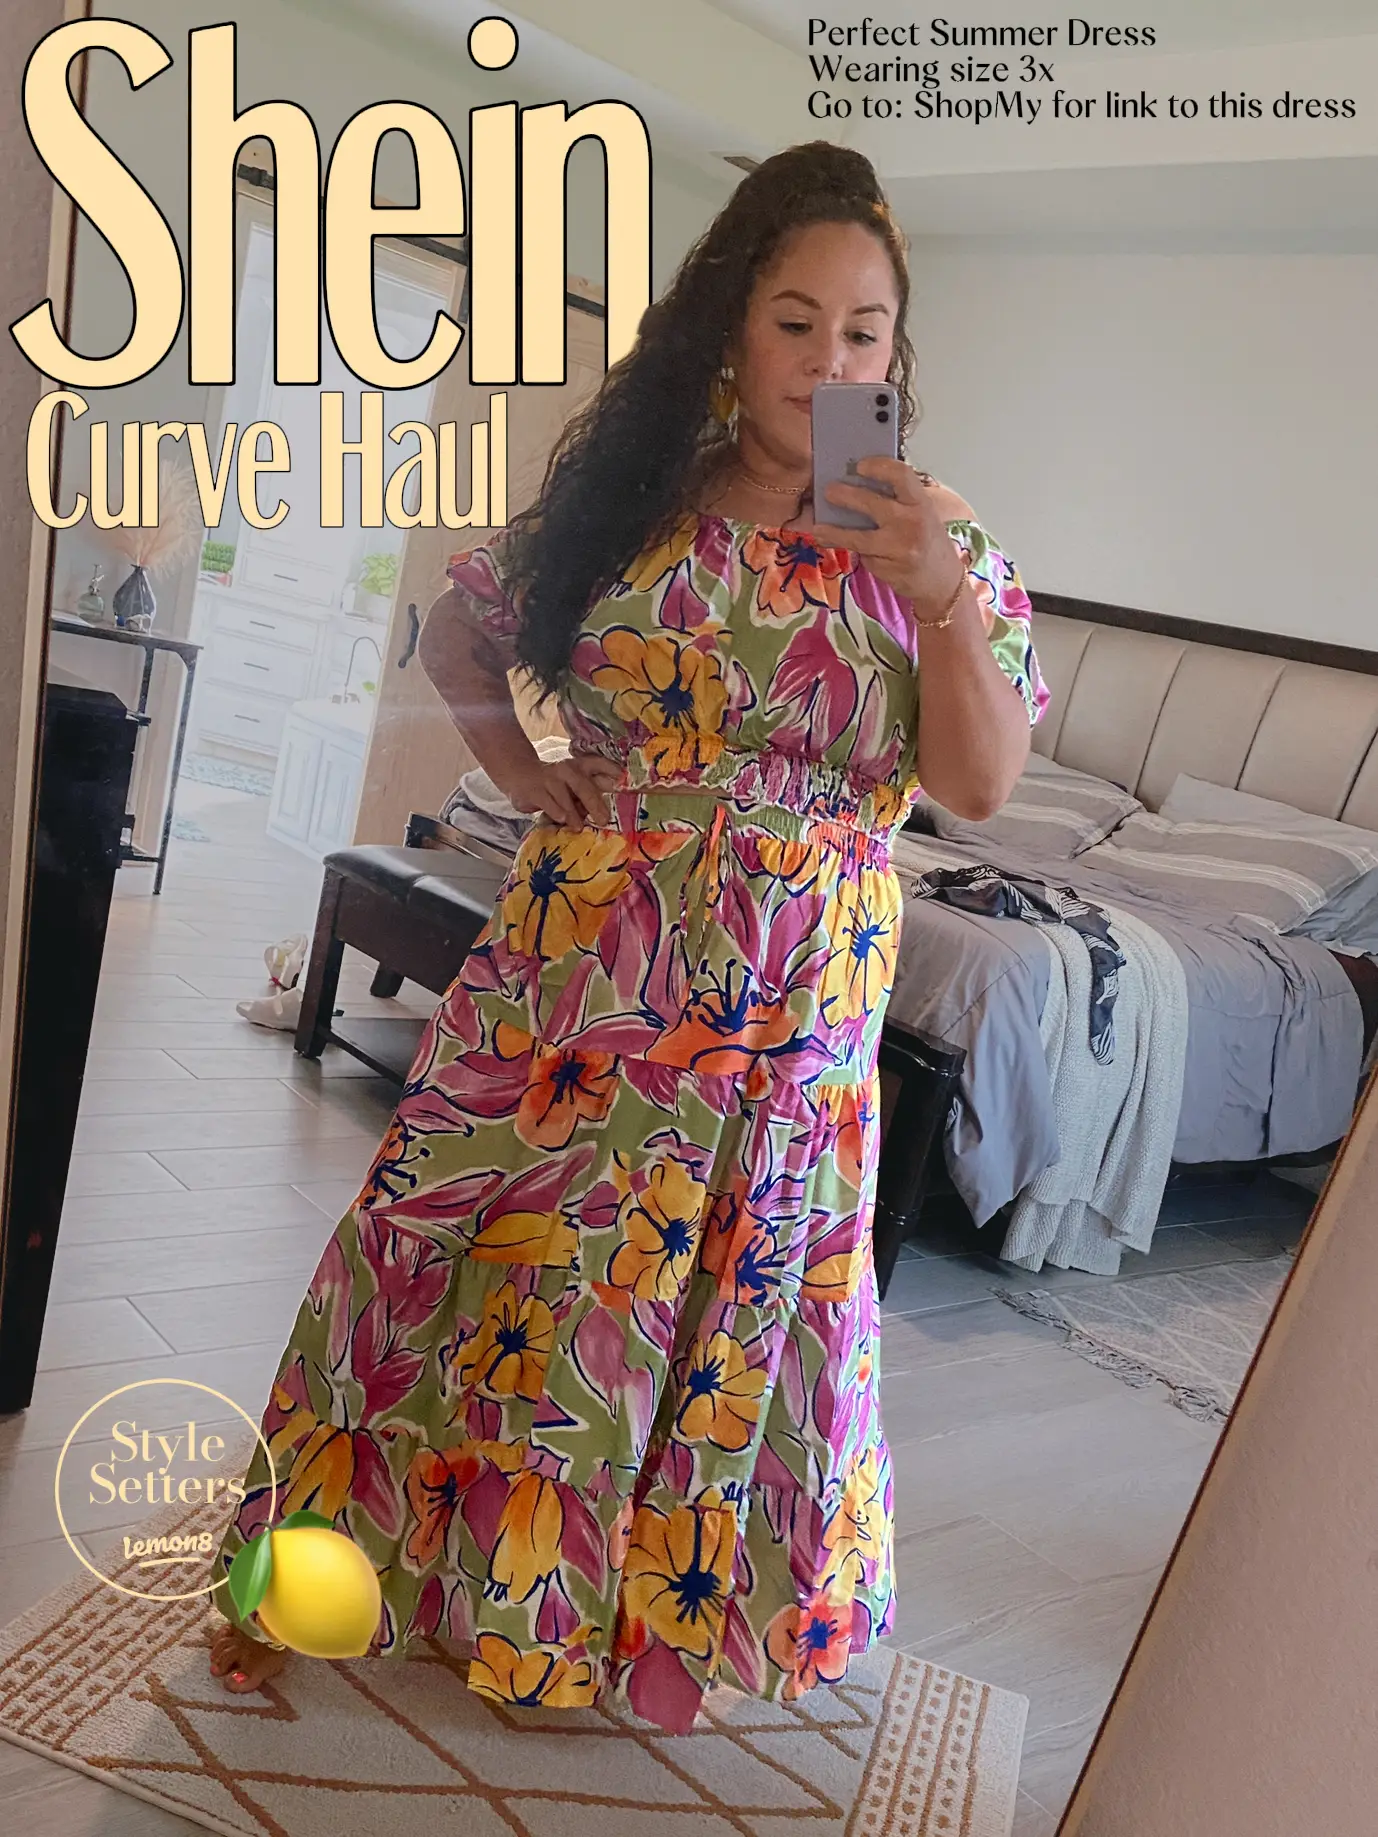 SHEIN CURVE - Fall in love with this dress. 😘